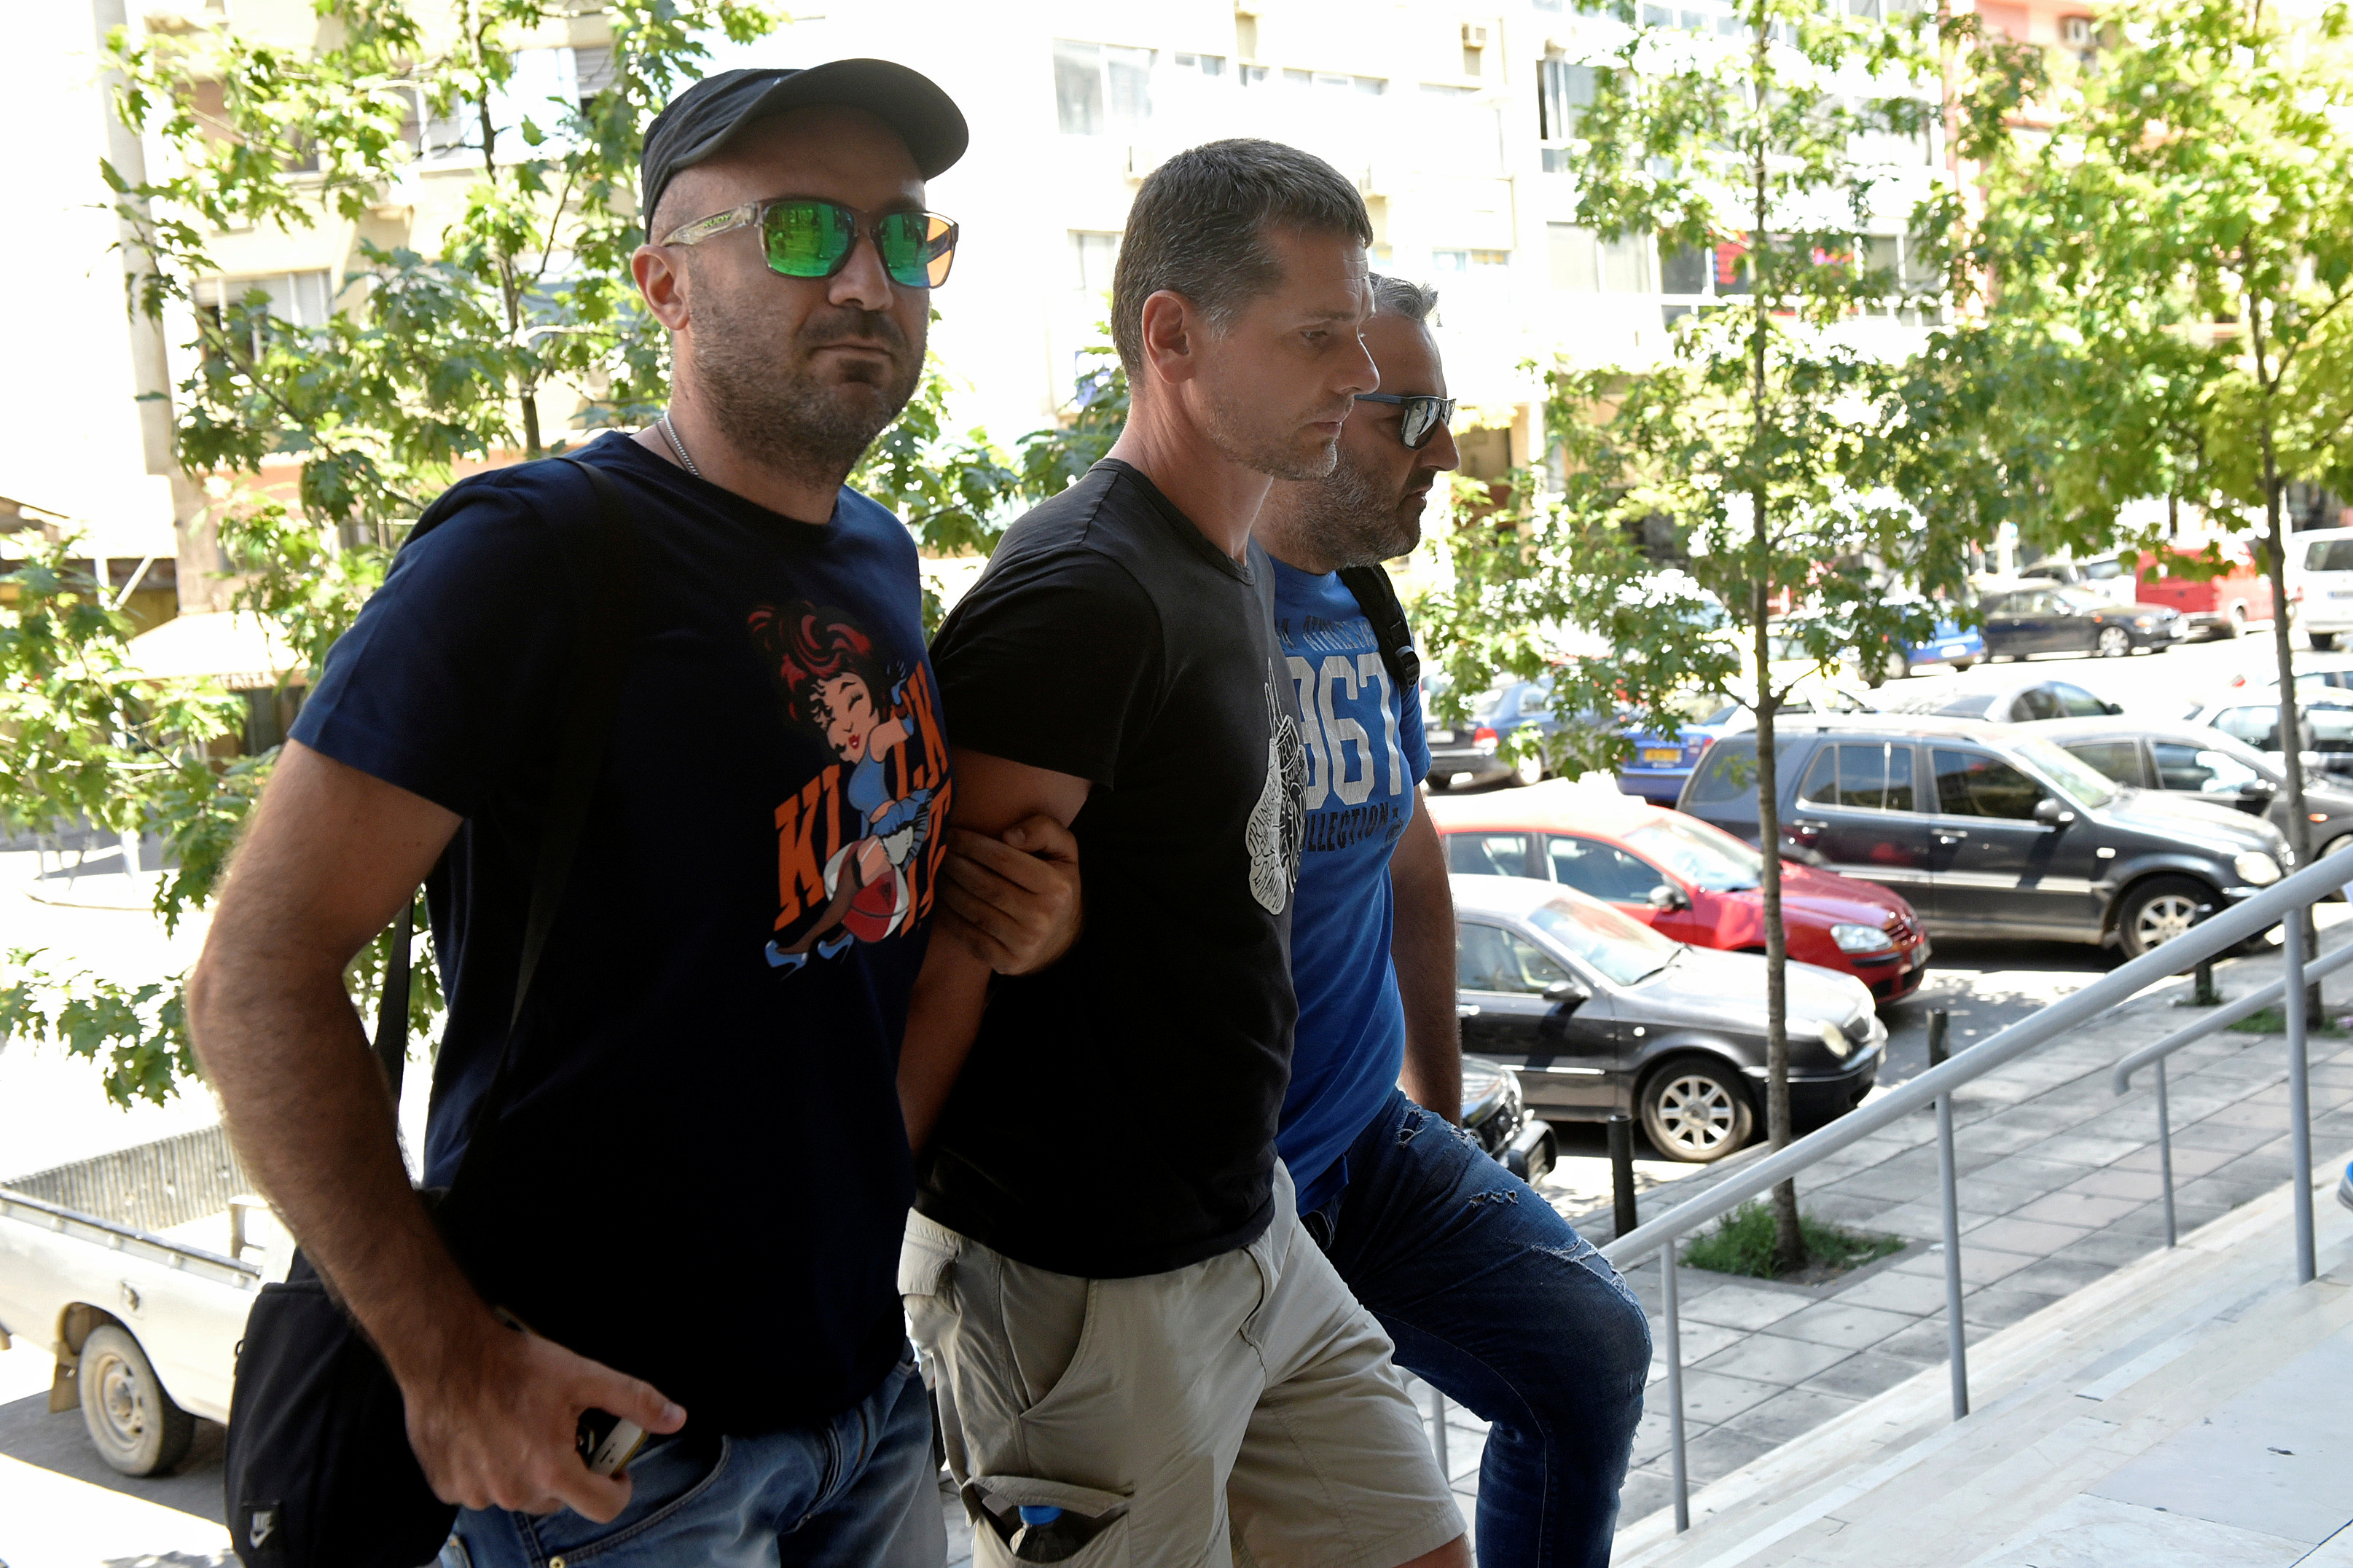 Alexander Vinnik, (C), is escorted by plain-clothes police officers to a court in Thessaloniki, Greece July 26, 2017. REUTERS/Alexandros Avramidis